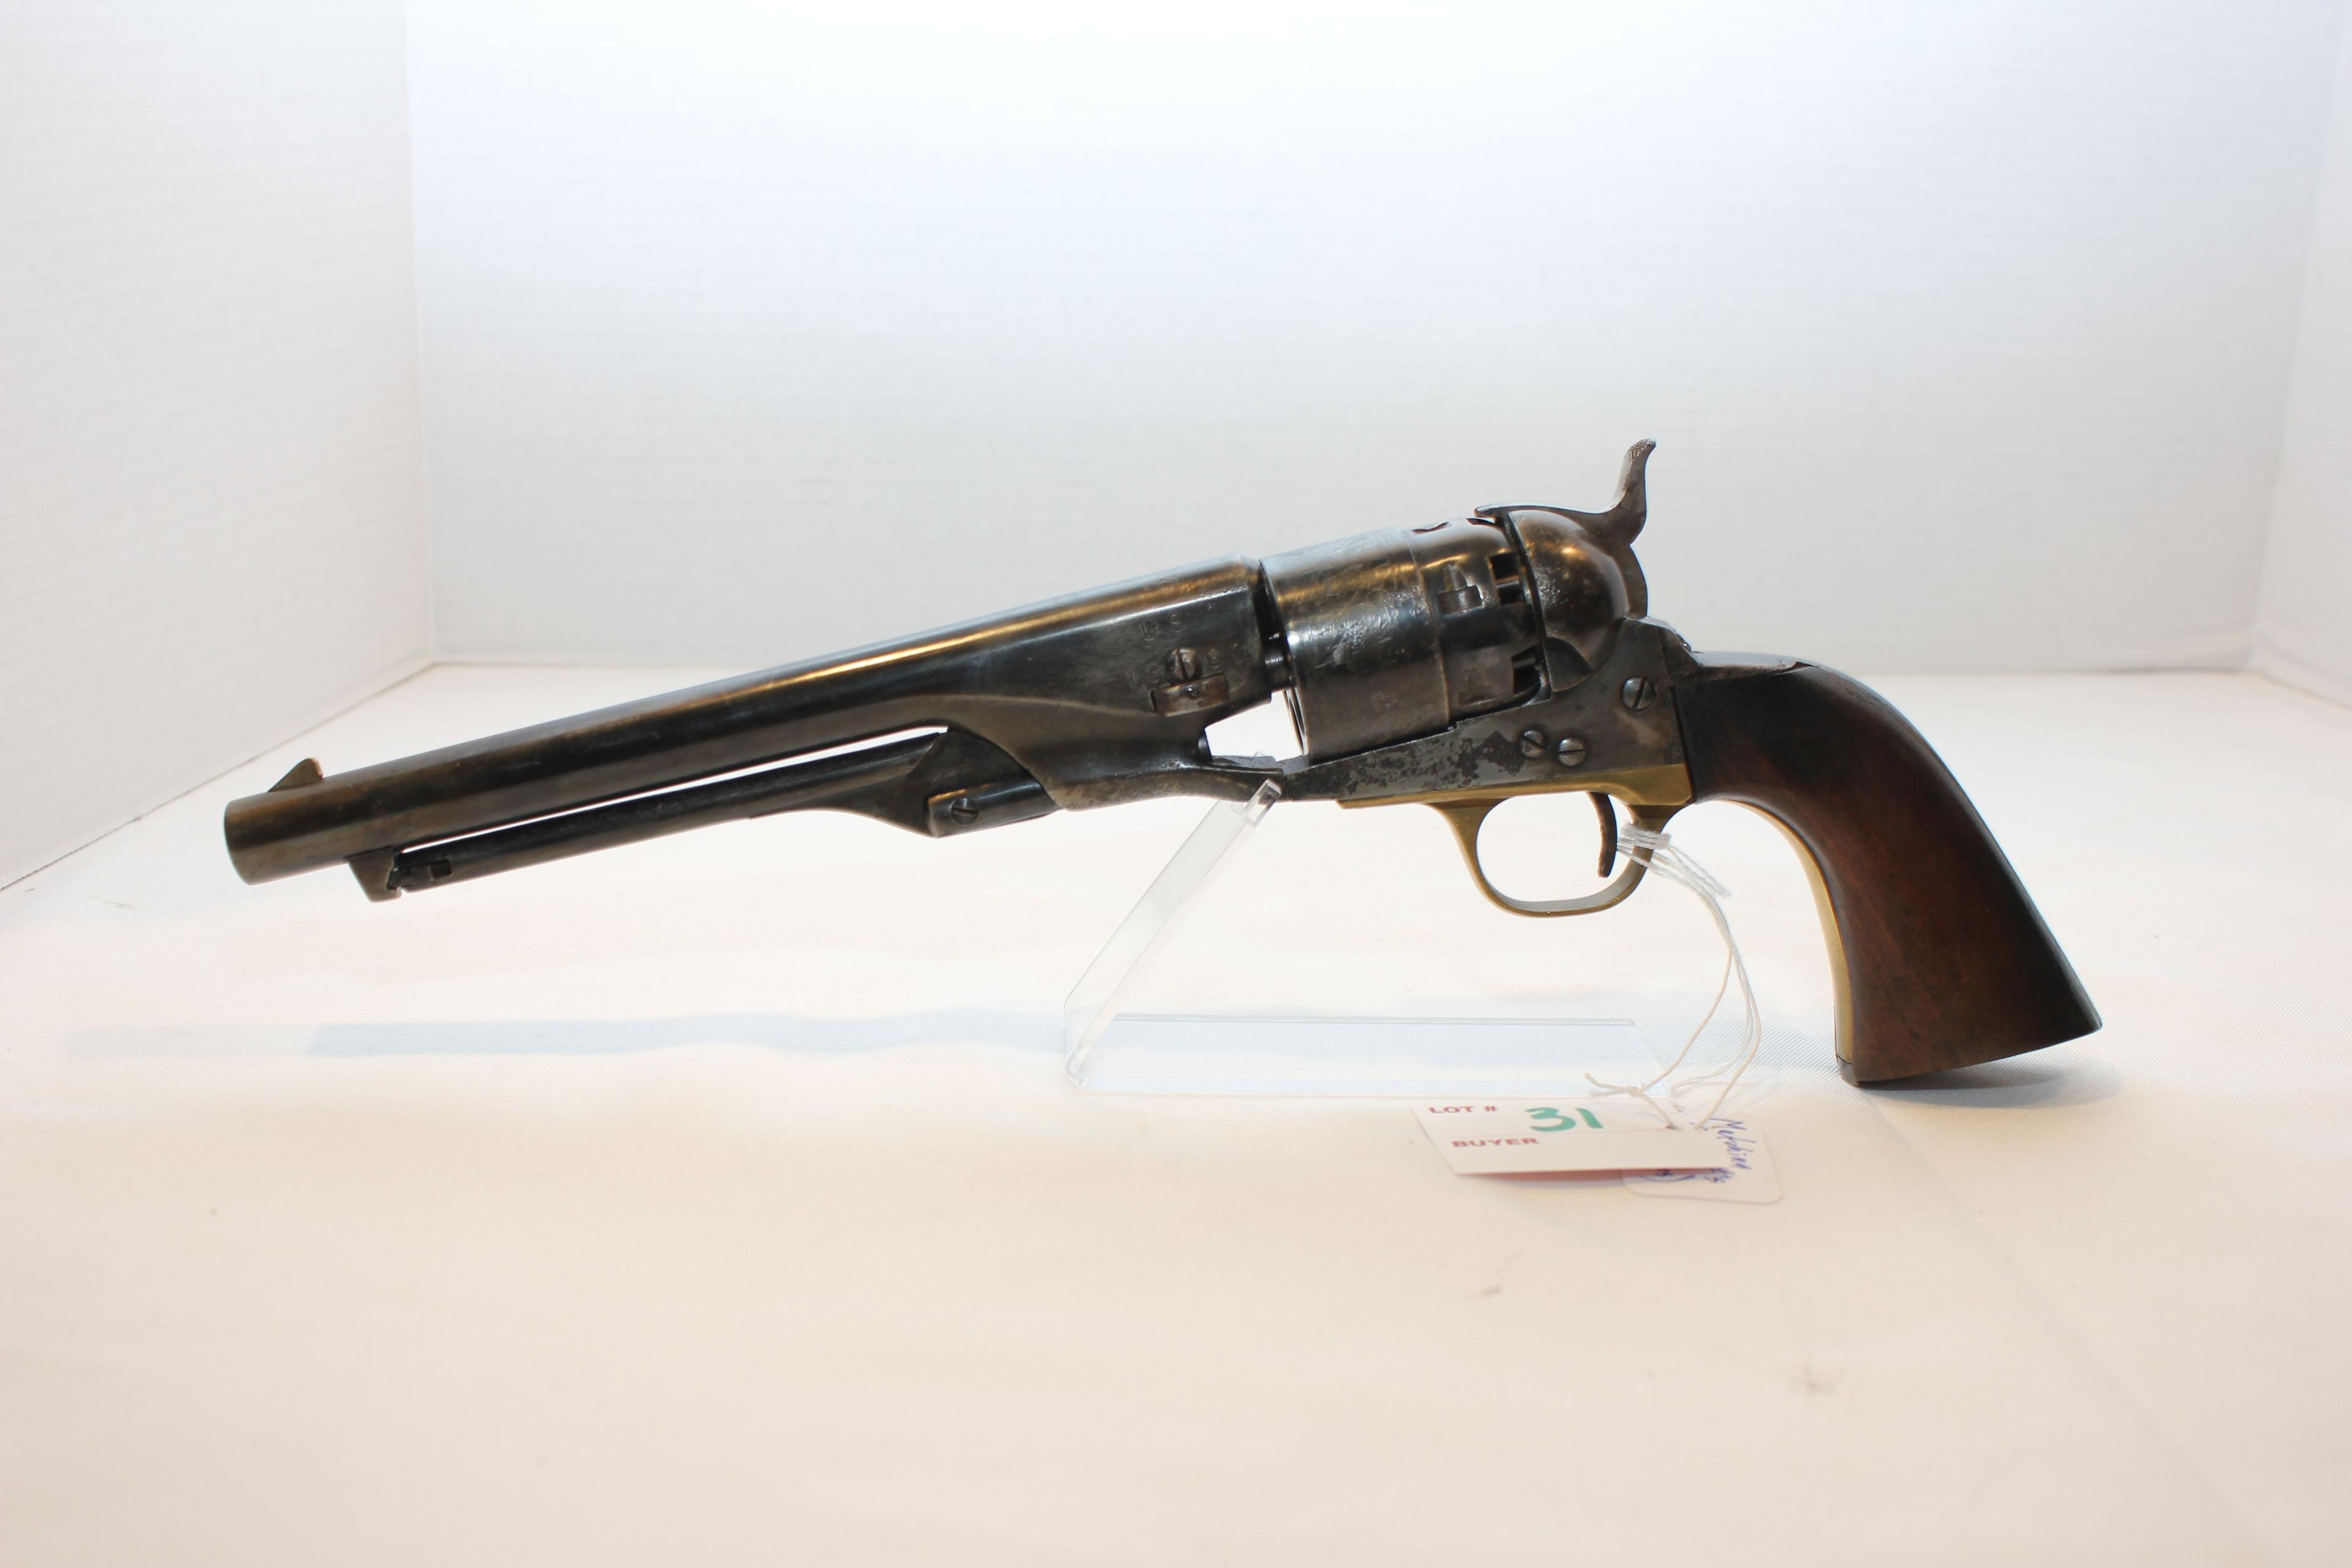 Unknown Mfr. Replica of Colt New Model Army 6-Shot Muzzle Loading Revolver w/8" Round BBL, Scrolled